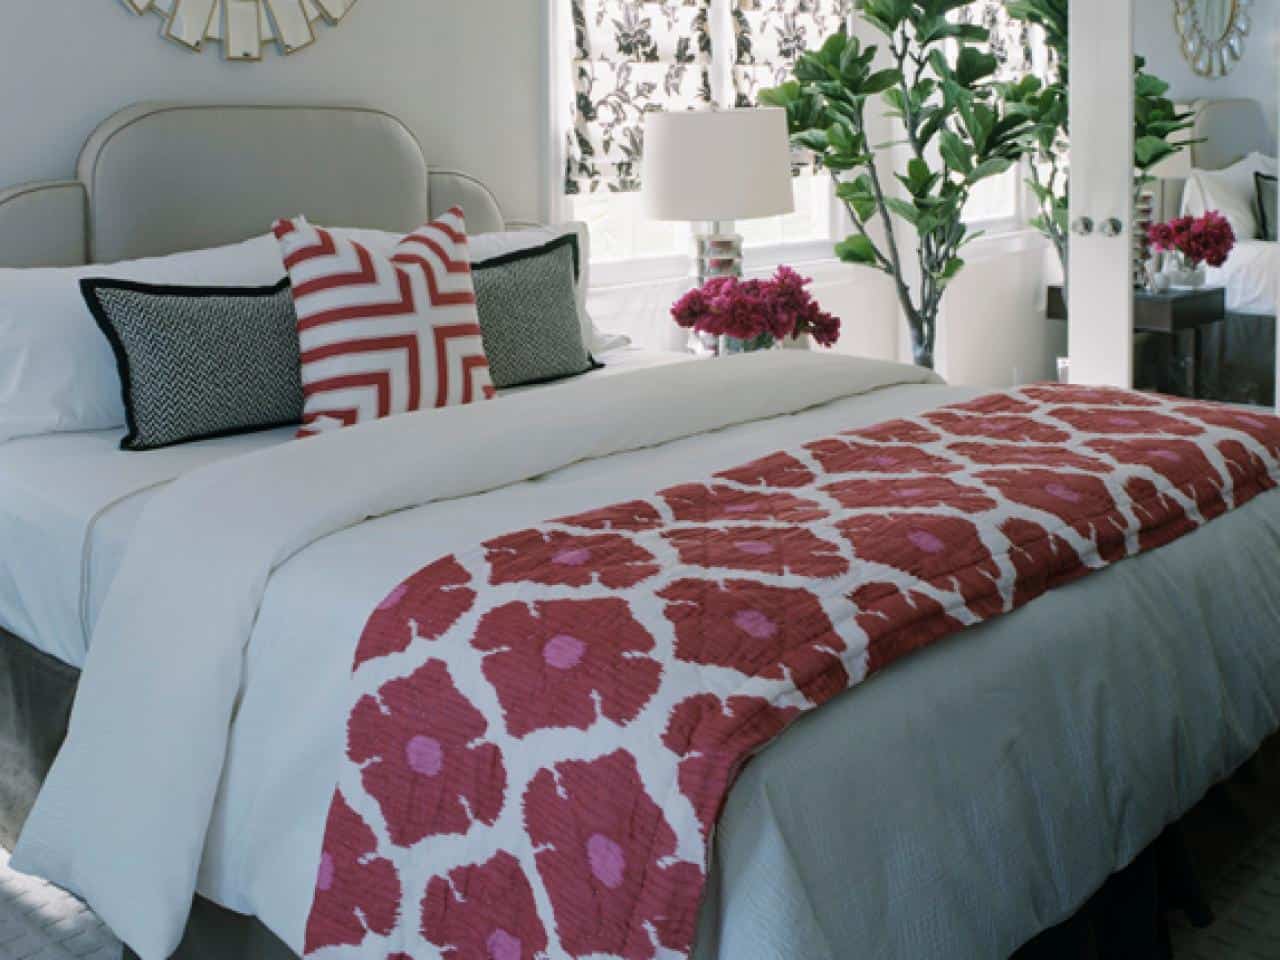 Have Your Guest Feel Right at Home with These Guest Room Design Concepts